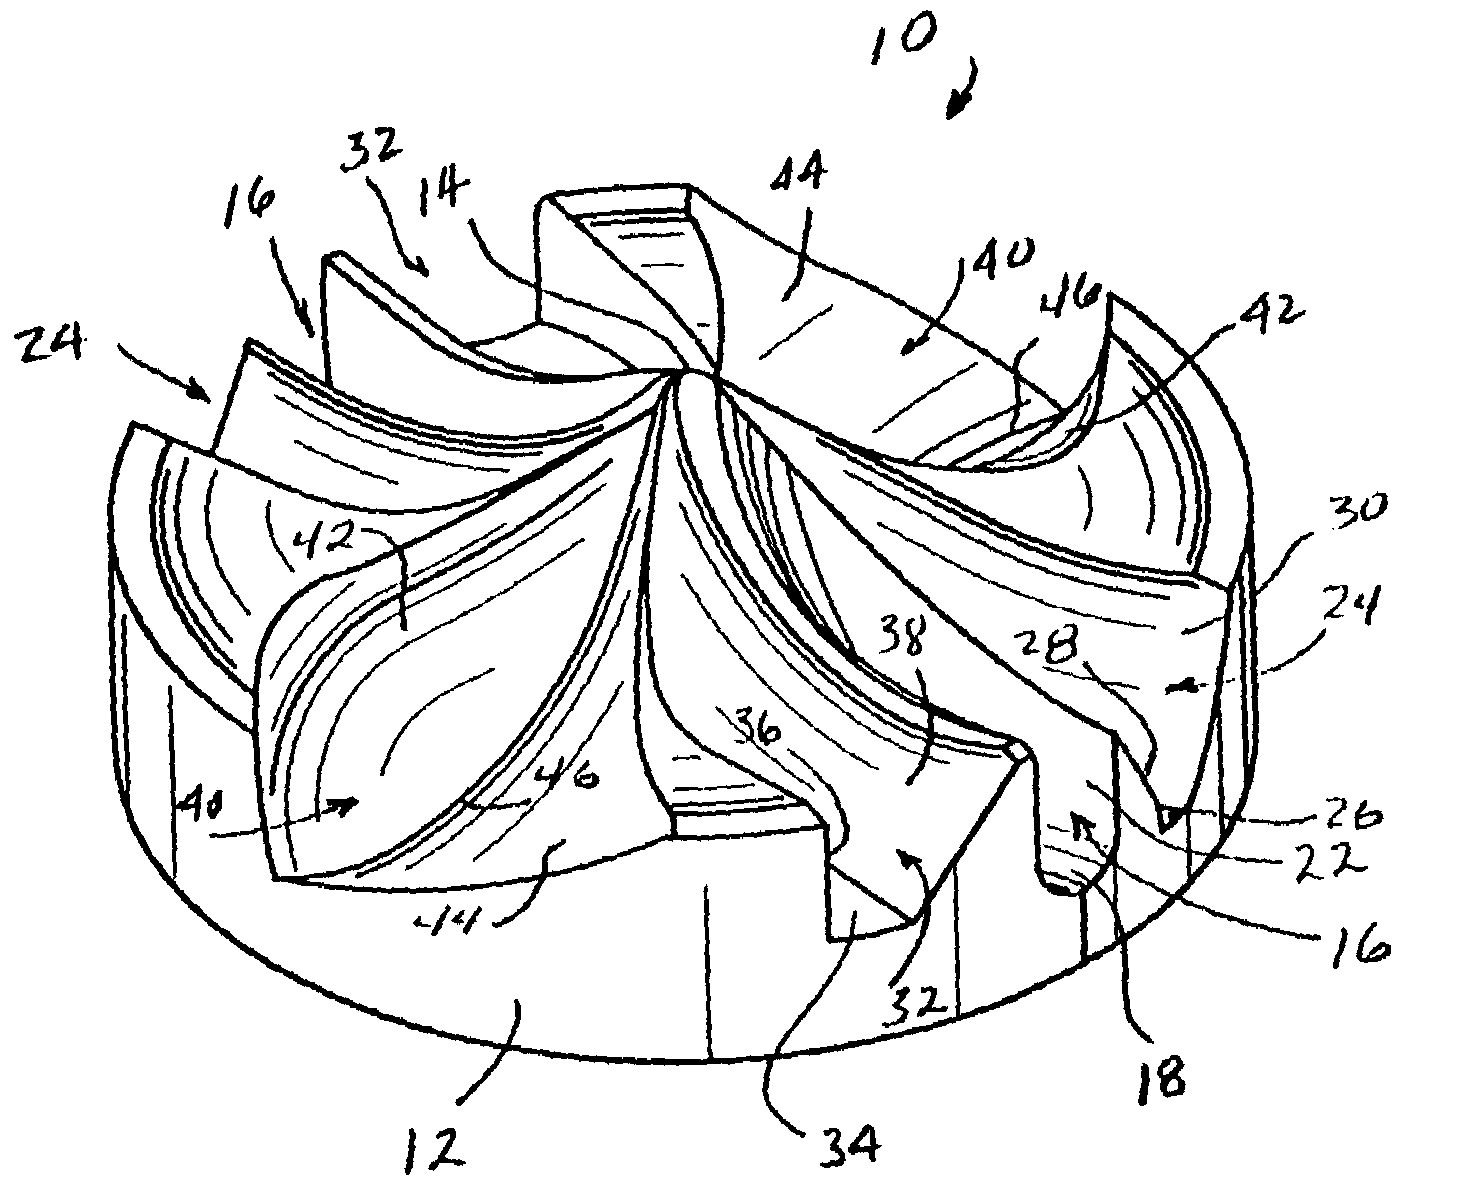 Water distribution plate for rotating sprinklers